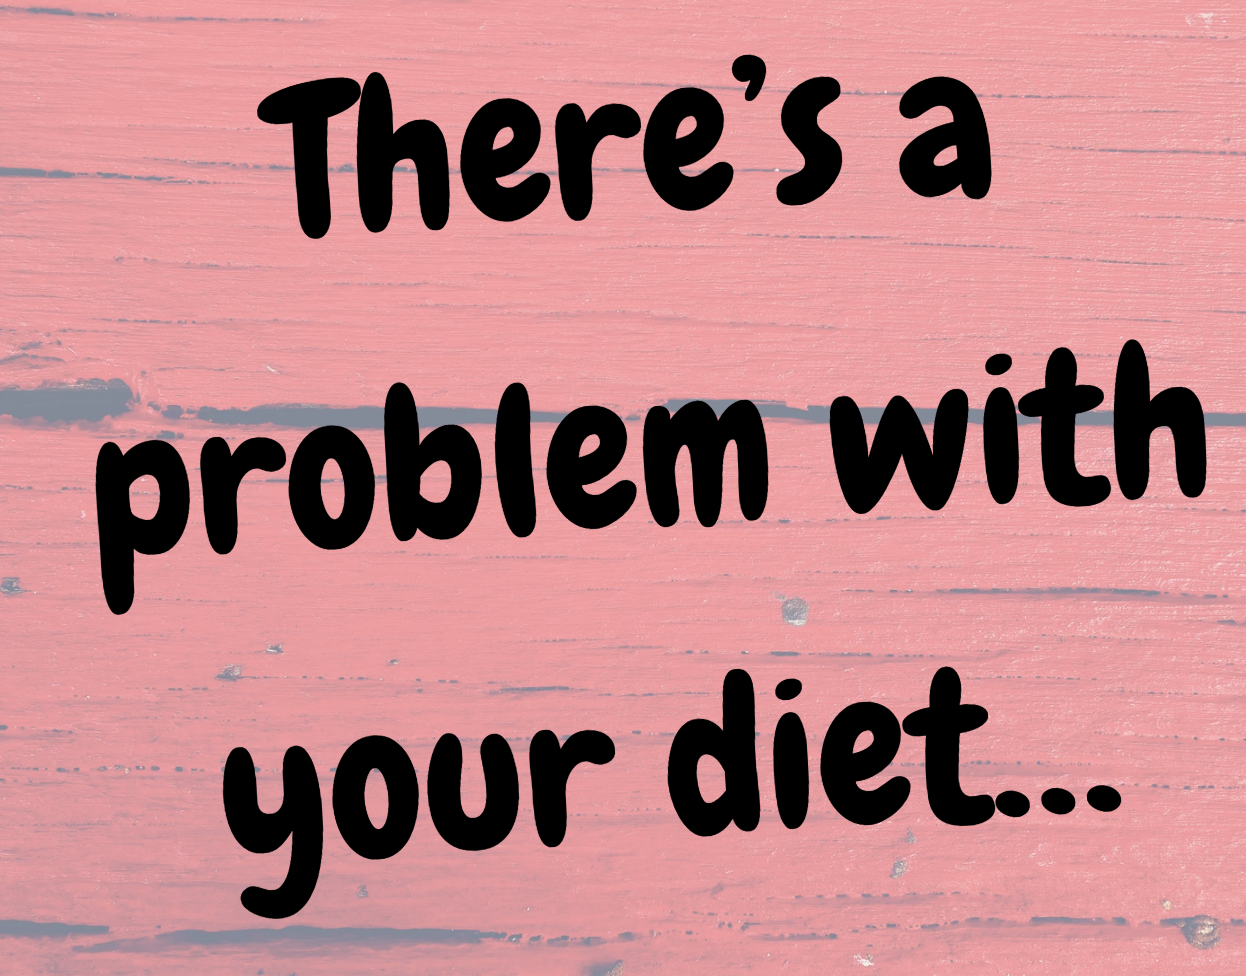 There’s a problem with your diet…